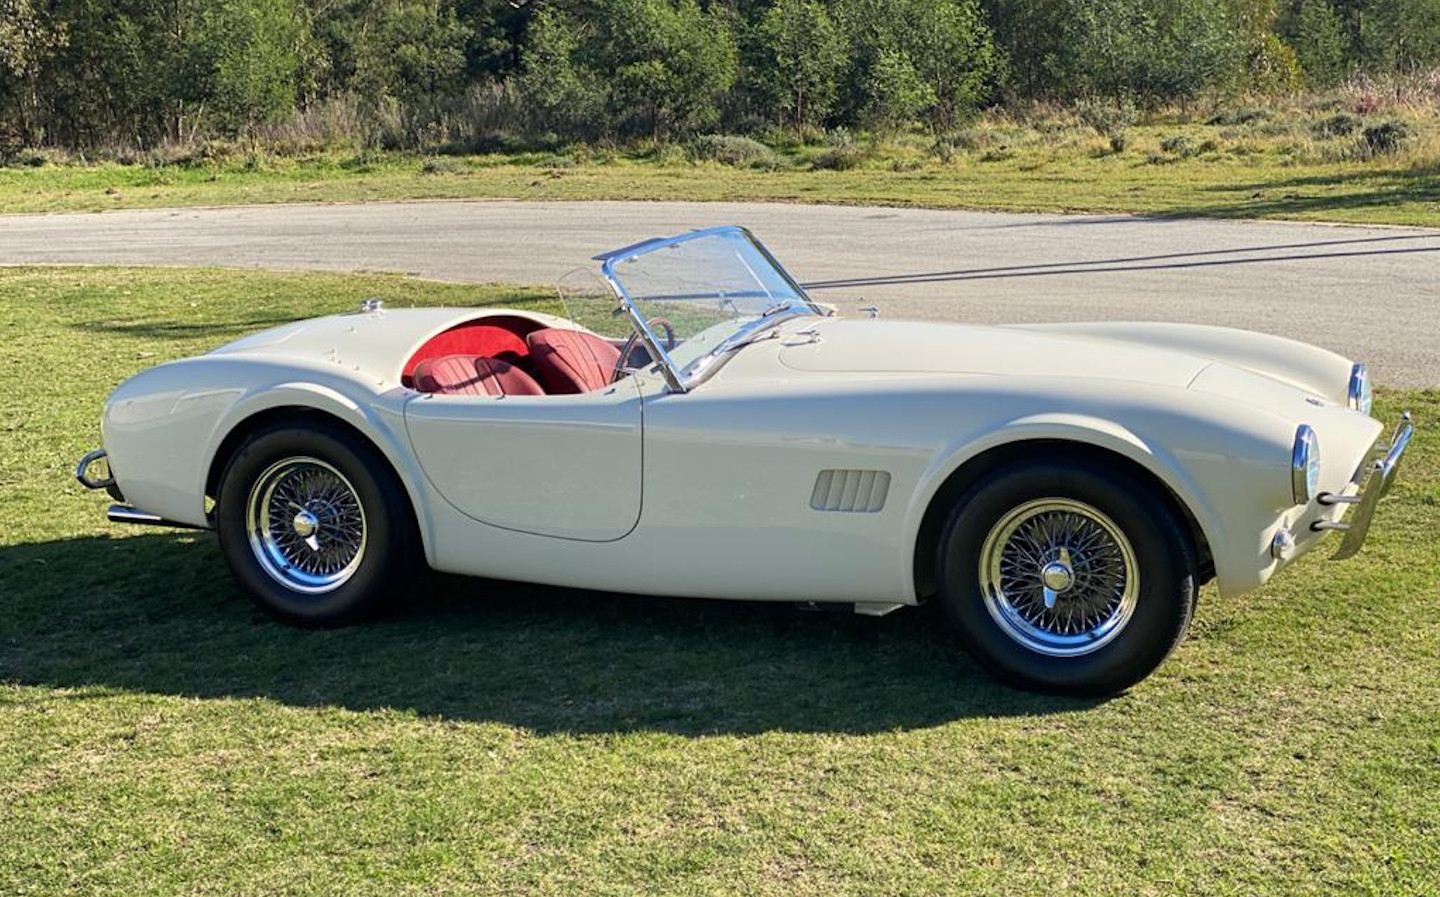 The AC Cobra is back with electric limited edition